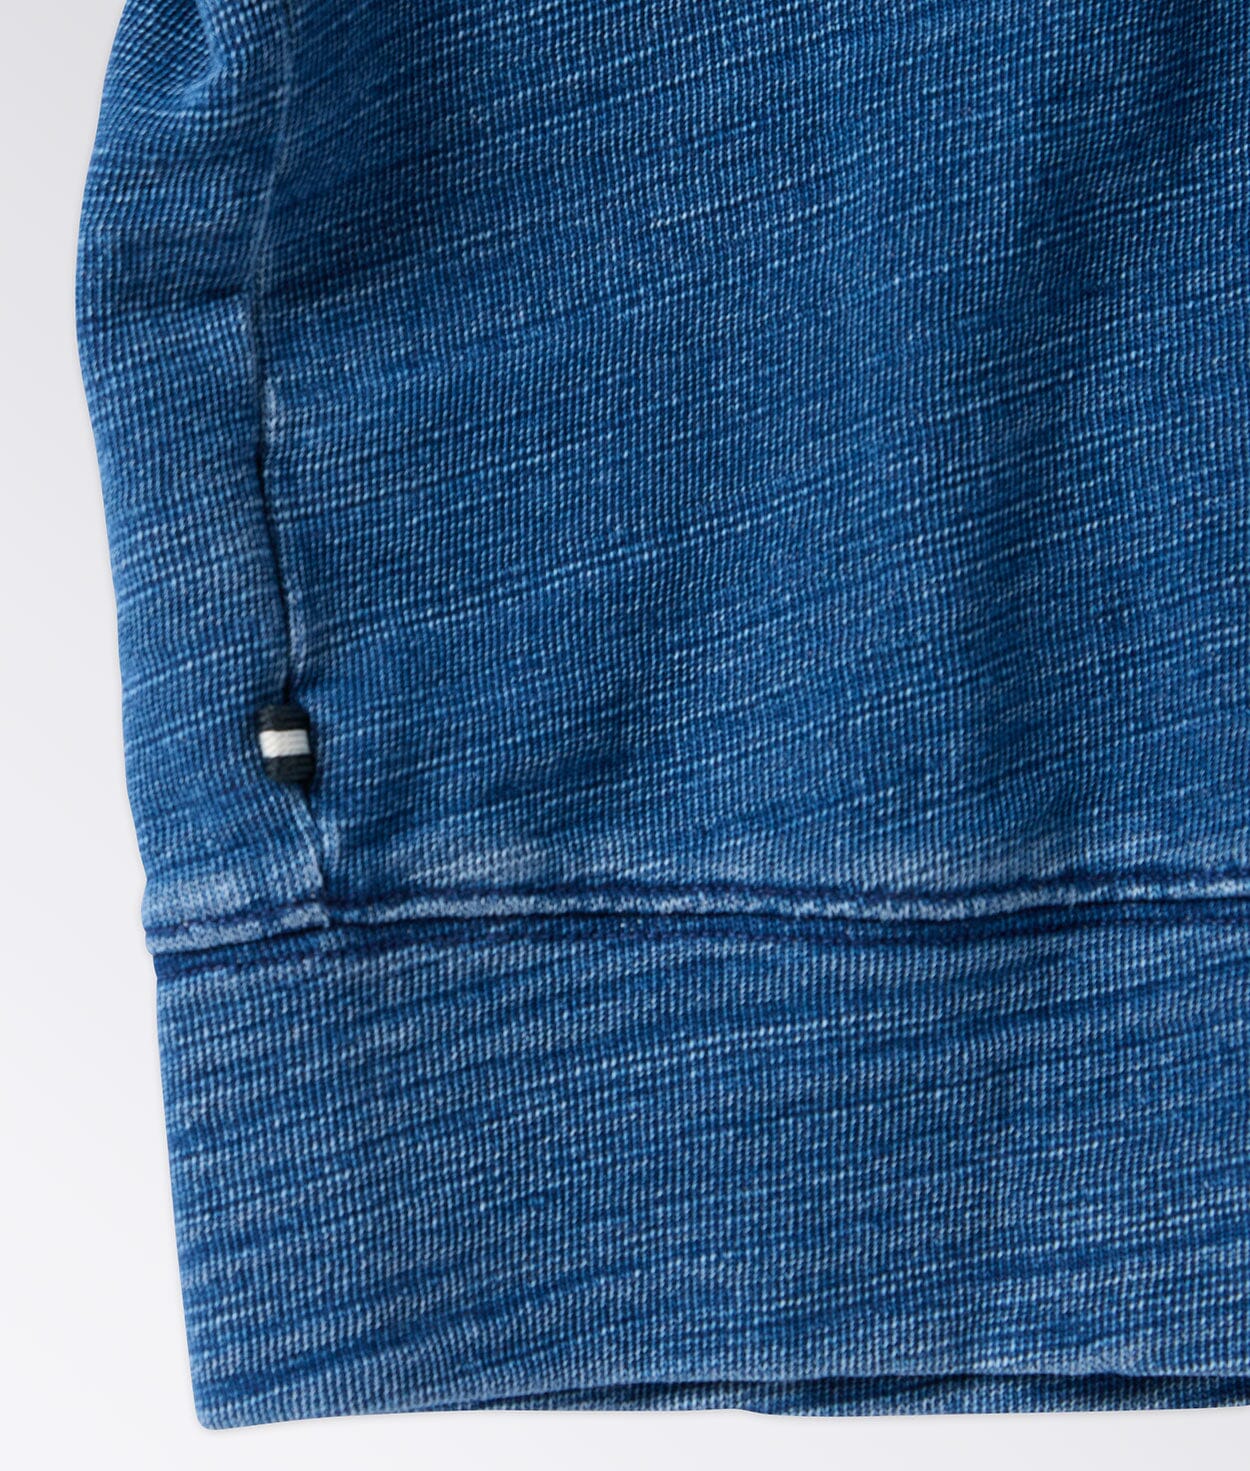 Close up of Small Tab Label on Side Seam